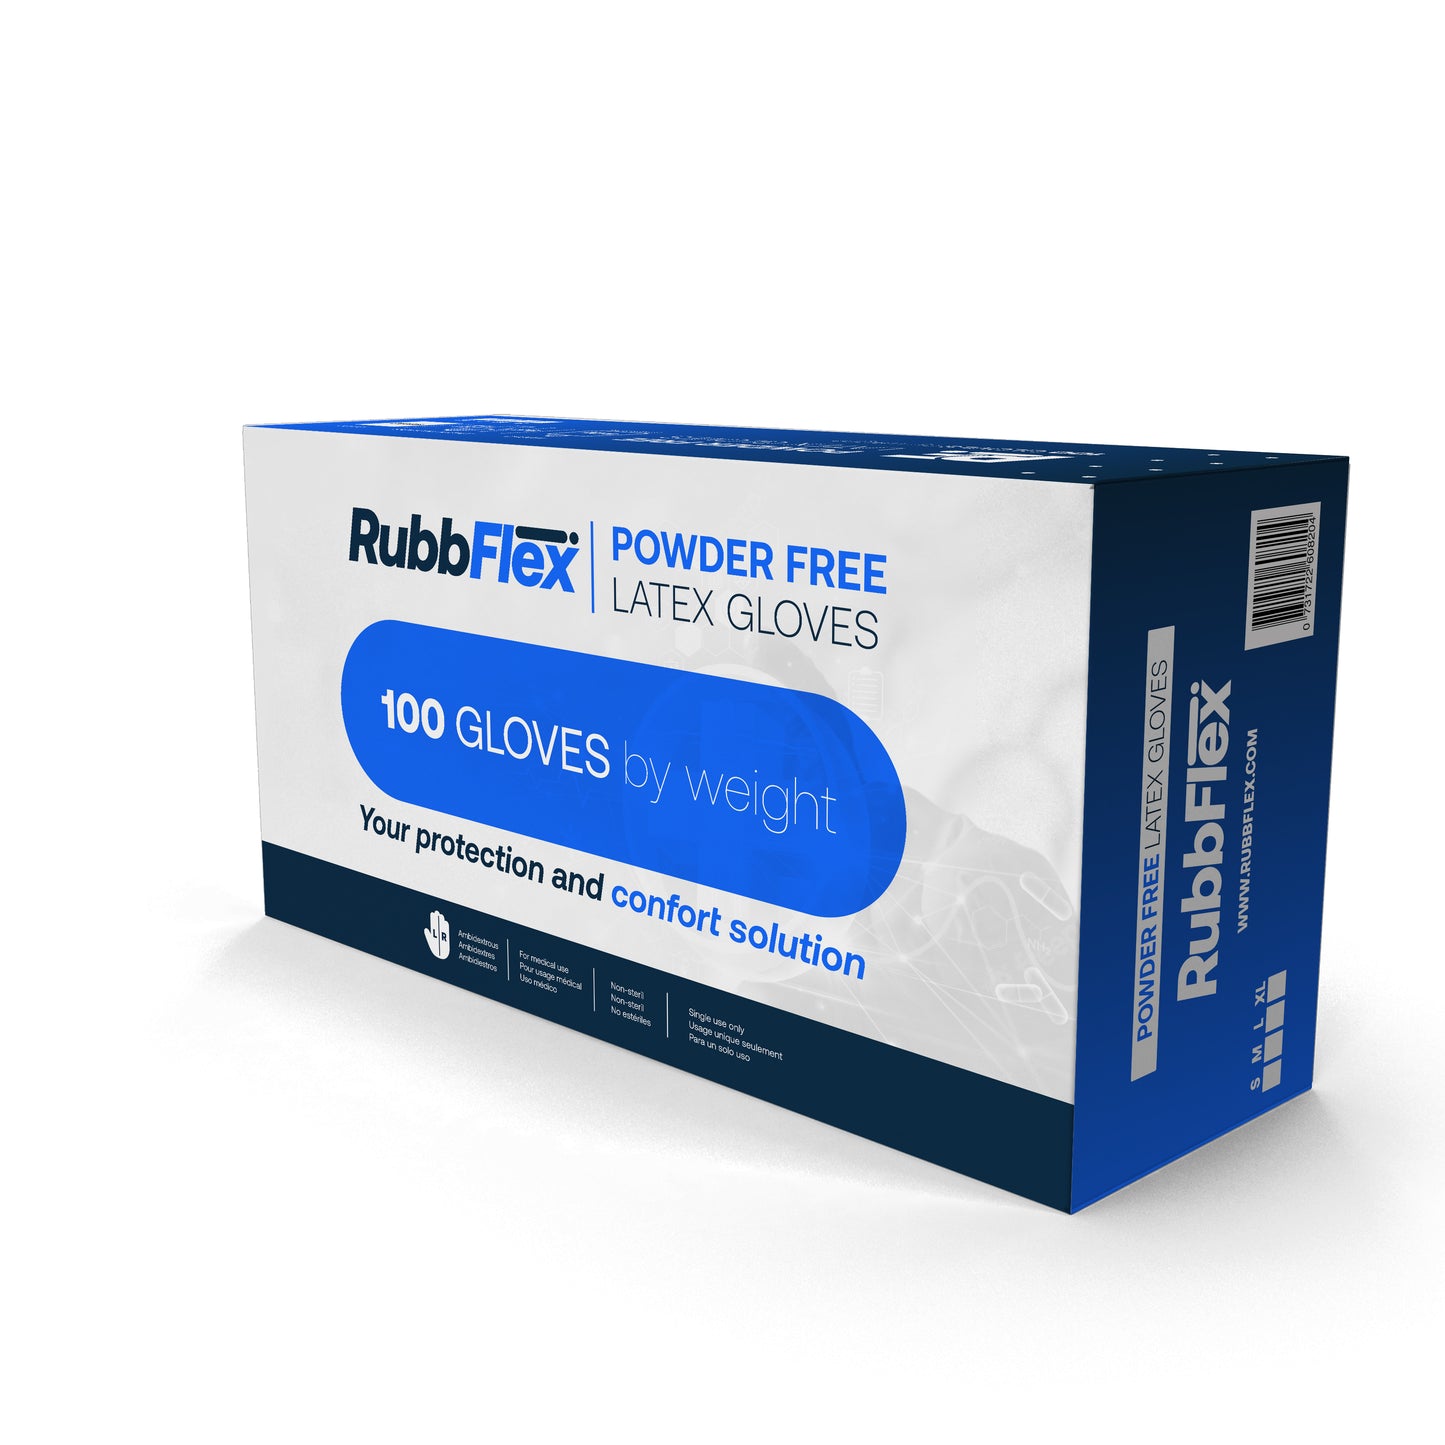 Rubbflex Latex Powder Free Disposable Gloves RLX100L - Medical Exam Grade - 3.1 mil Thick (Pack of 100) LARGE